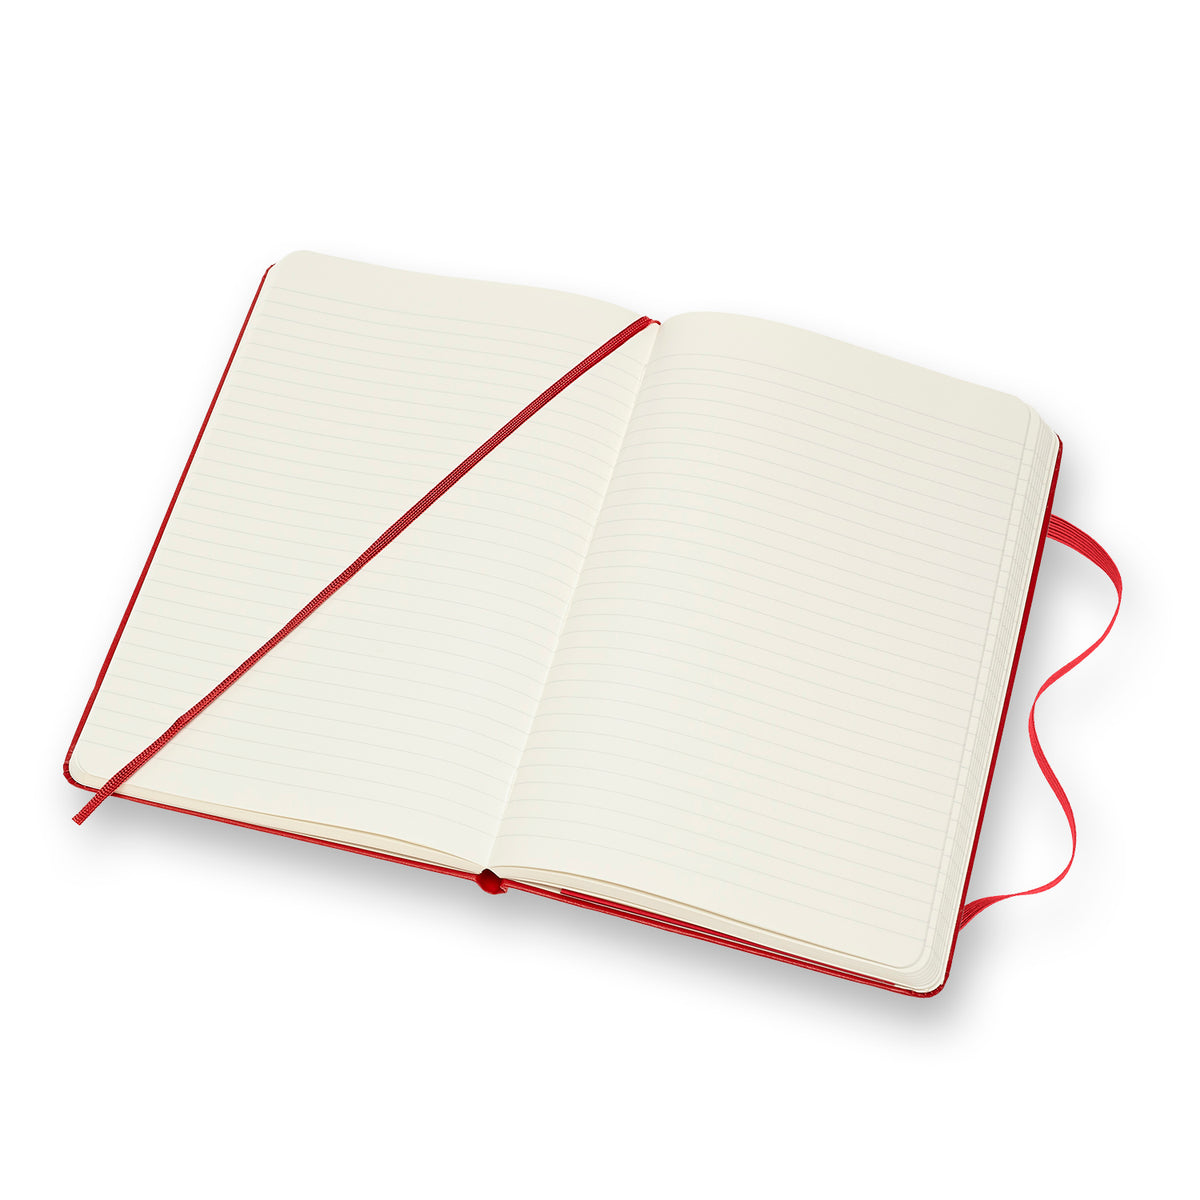 Moleskine - Classic Hard Cover Notebook - Ruled - Large - Scarlet Red